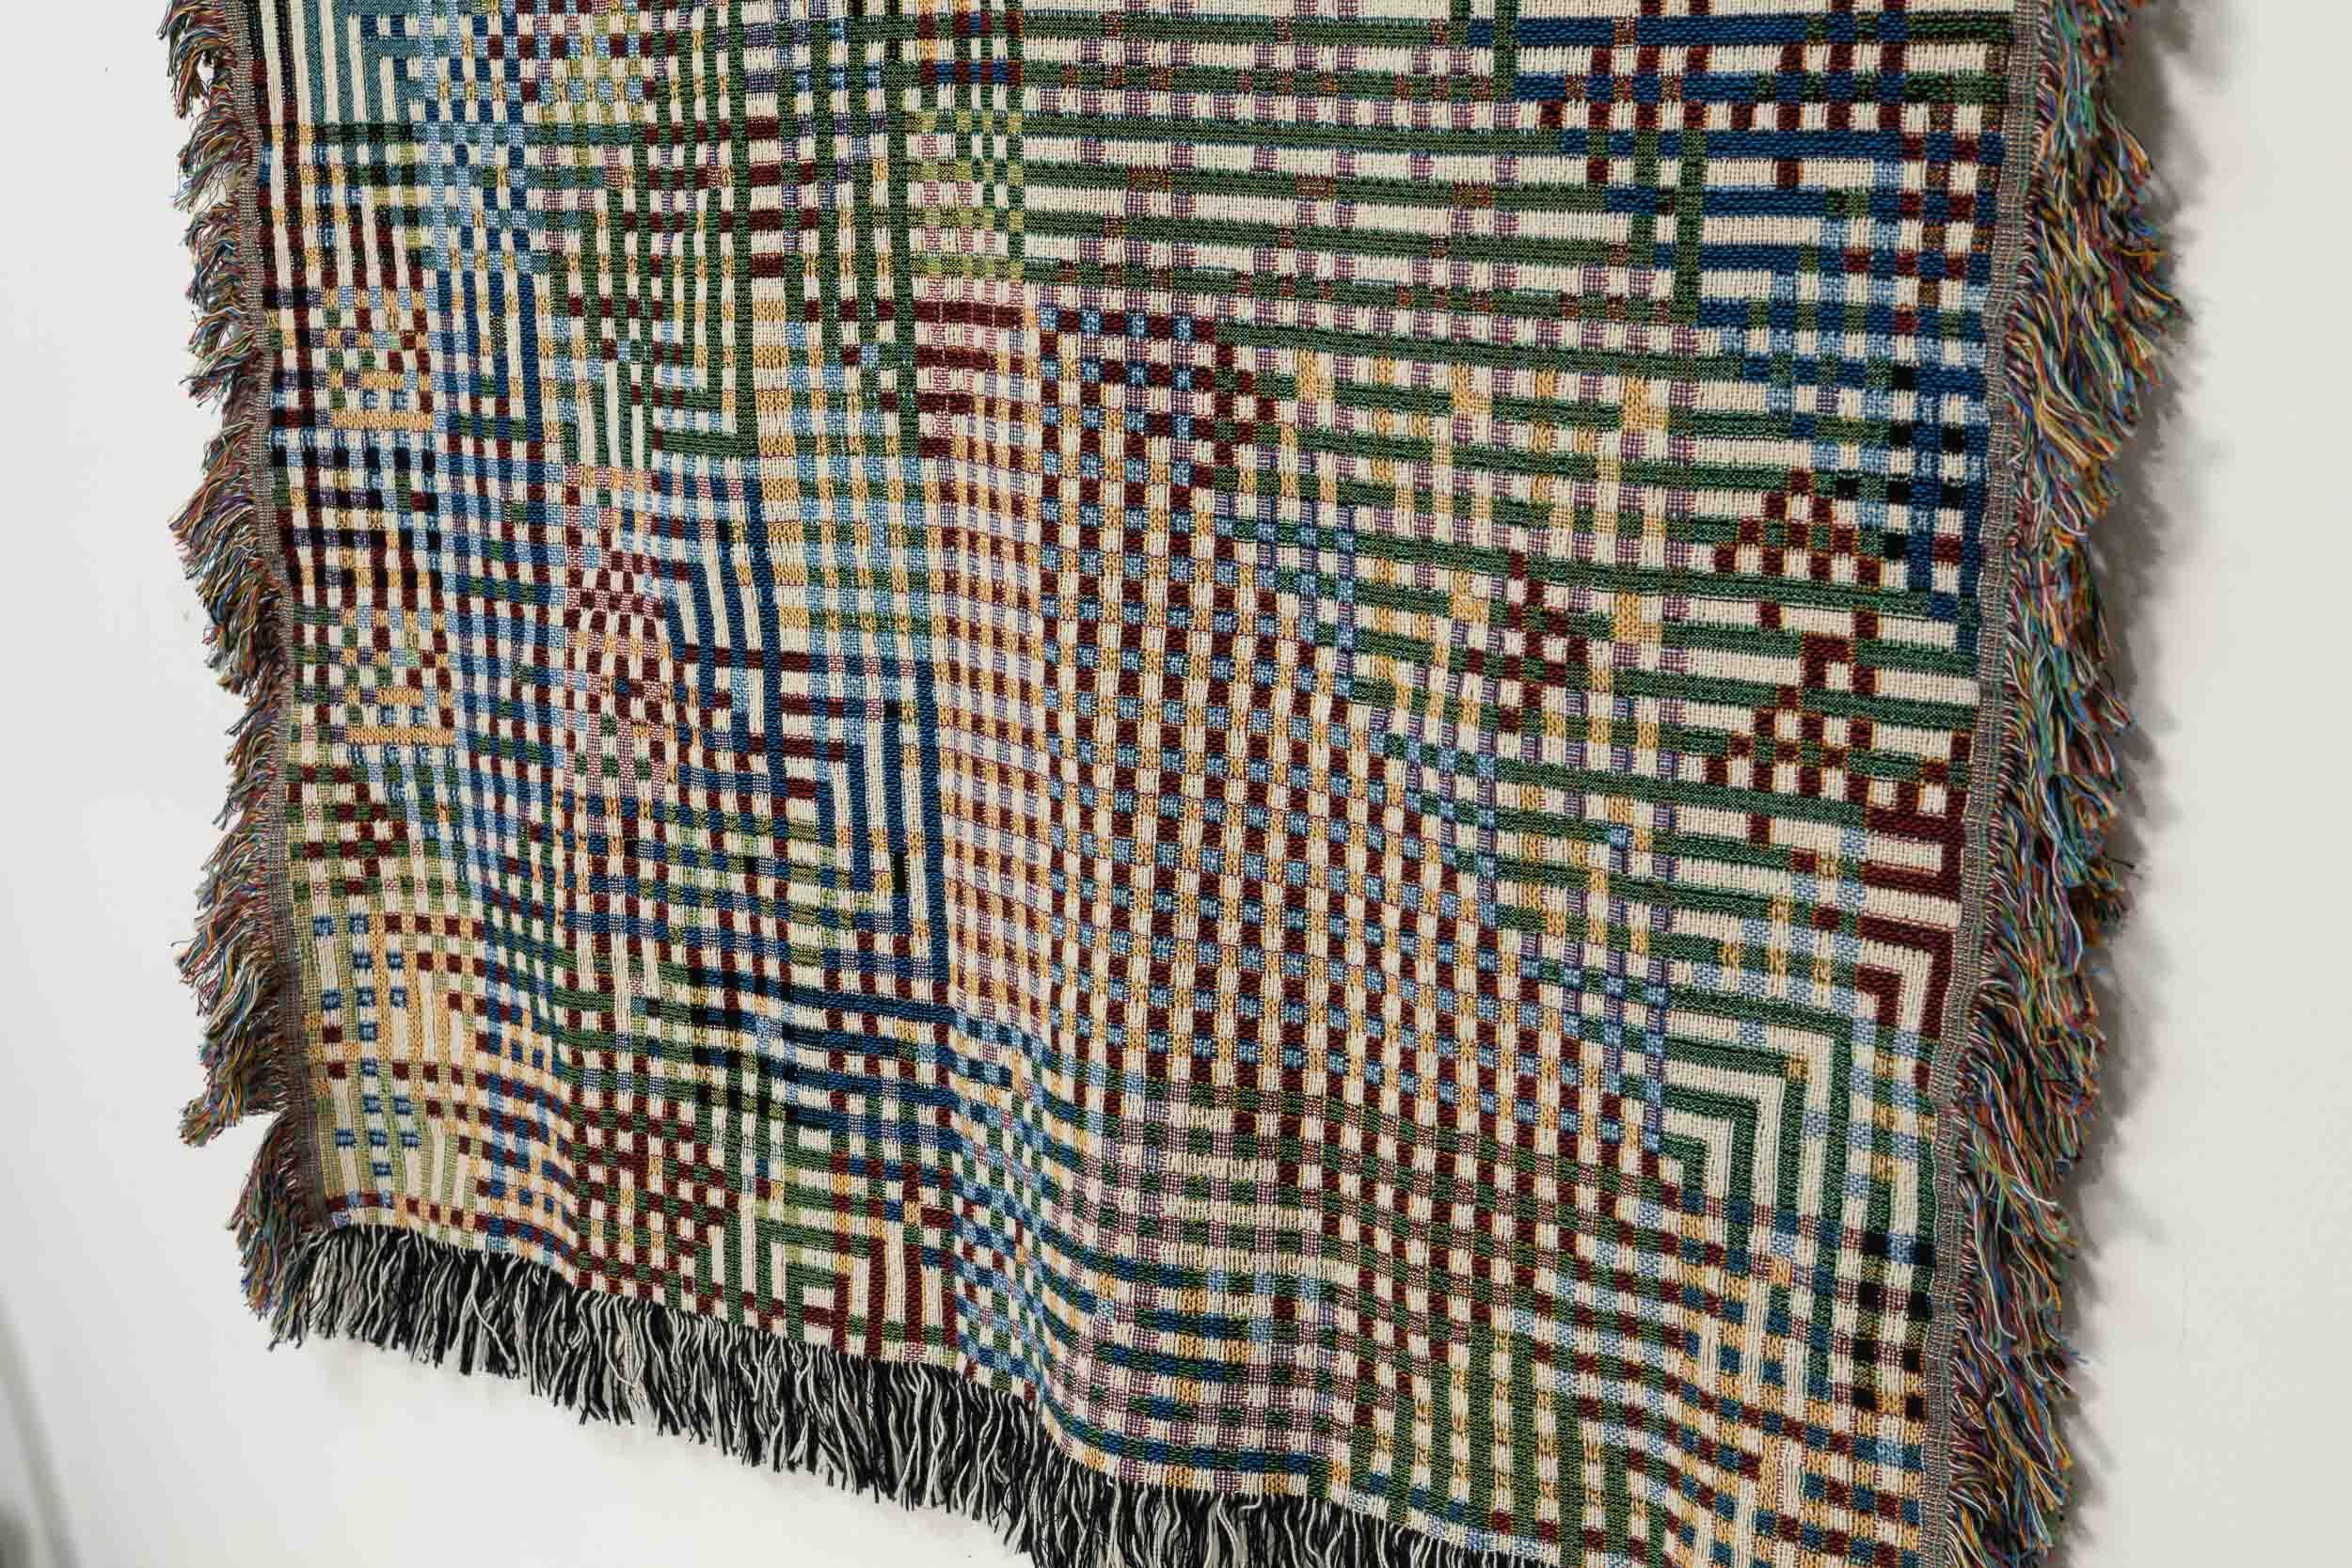 Bit map throw blanket 03 by Luft Tanaka Studio 

A multicolored graphic throw blanket / wall tapestry woven out of 100 % cotton yarn based on digital pixel art created using an early bitmap drawing software from the 1980s and 1990s.

Measures: